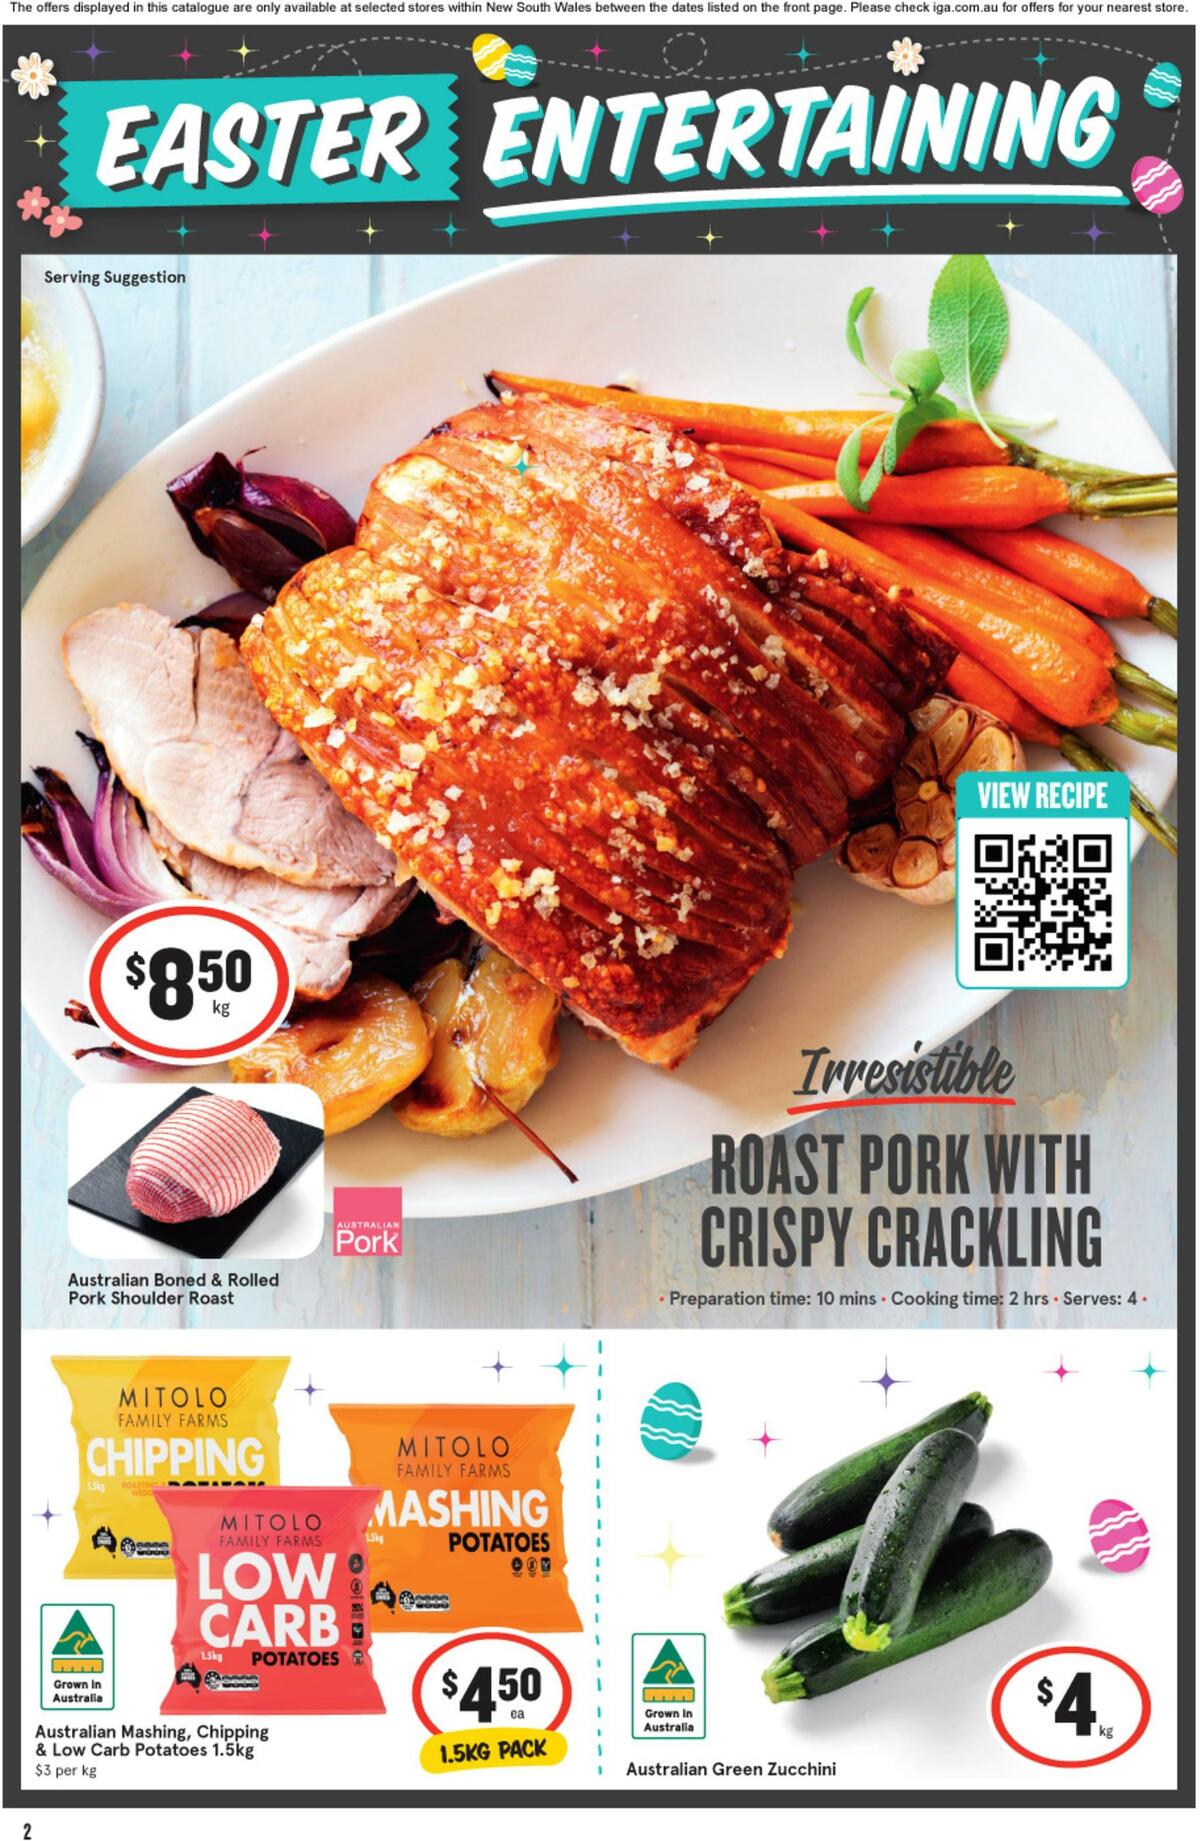 IGA Catalogues from 29 March